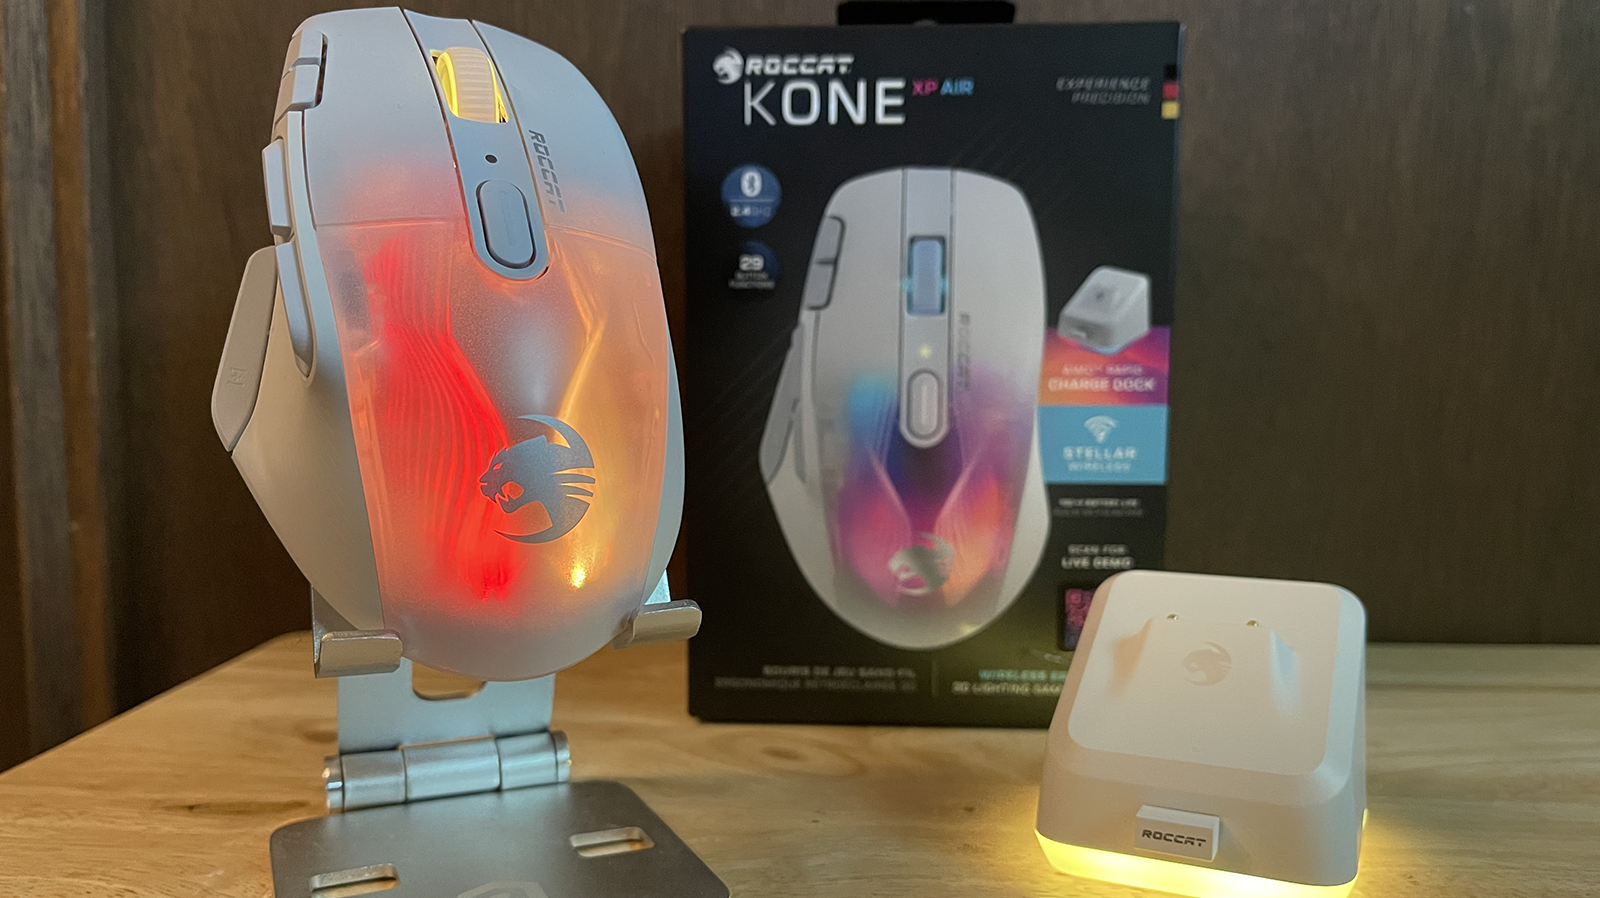 5 Things You Need To Know About The Kone XP Air, This thing is 🔥, By  ROCCAT